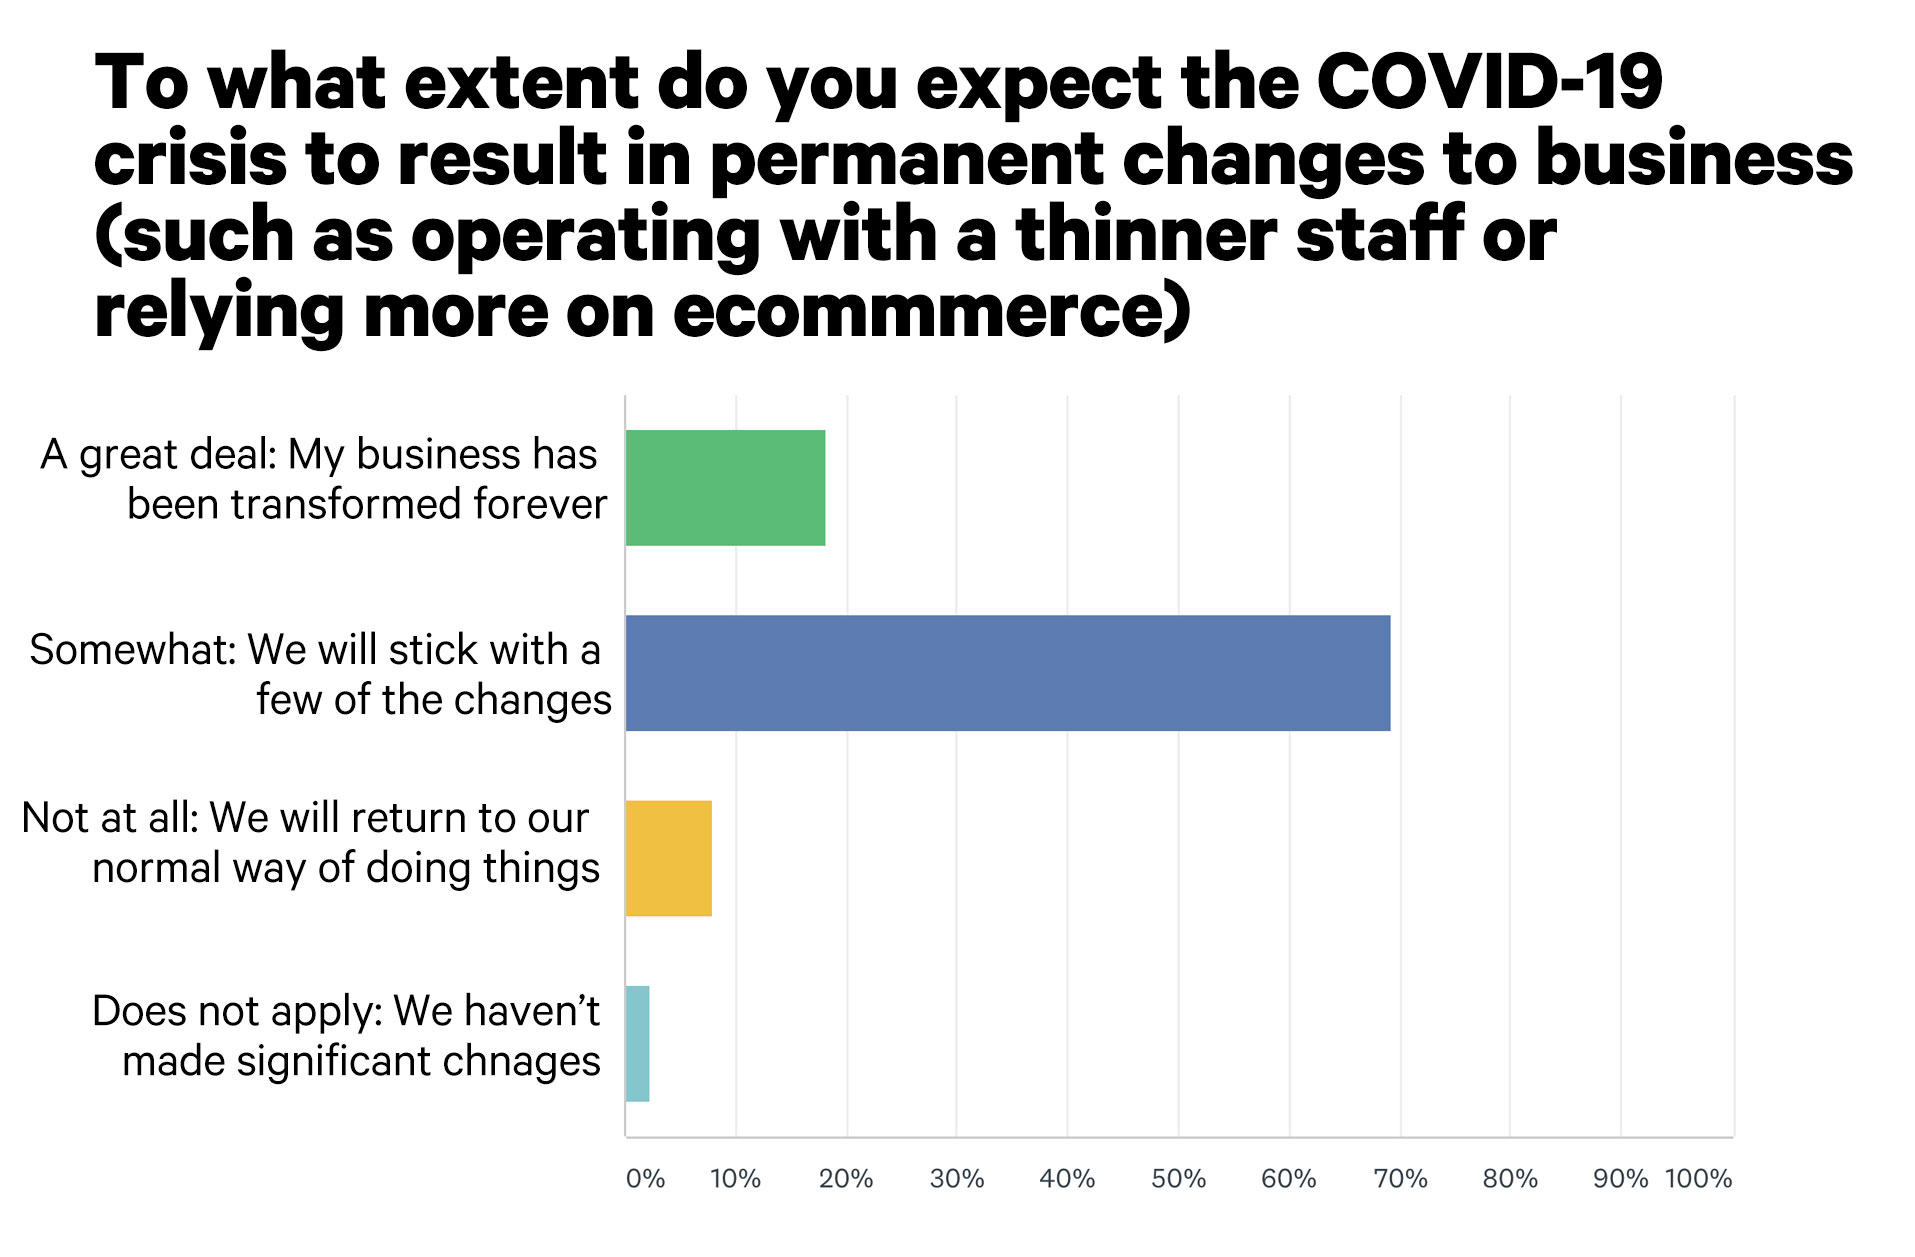 Nearly 9-in-10 Eyecare Biz Owners See COVID-19 Causing Permanent Change to Their Businesses